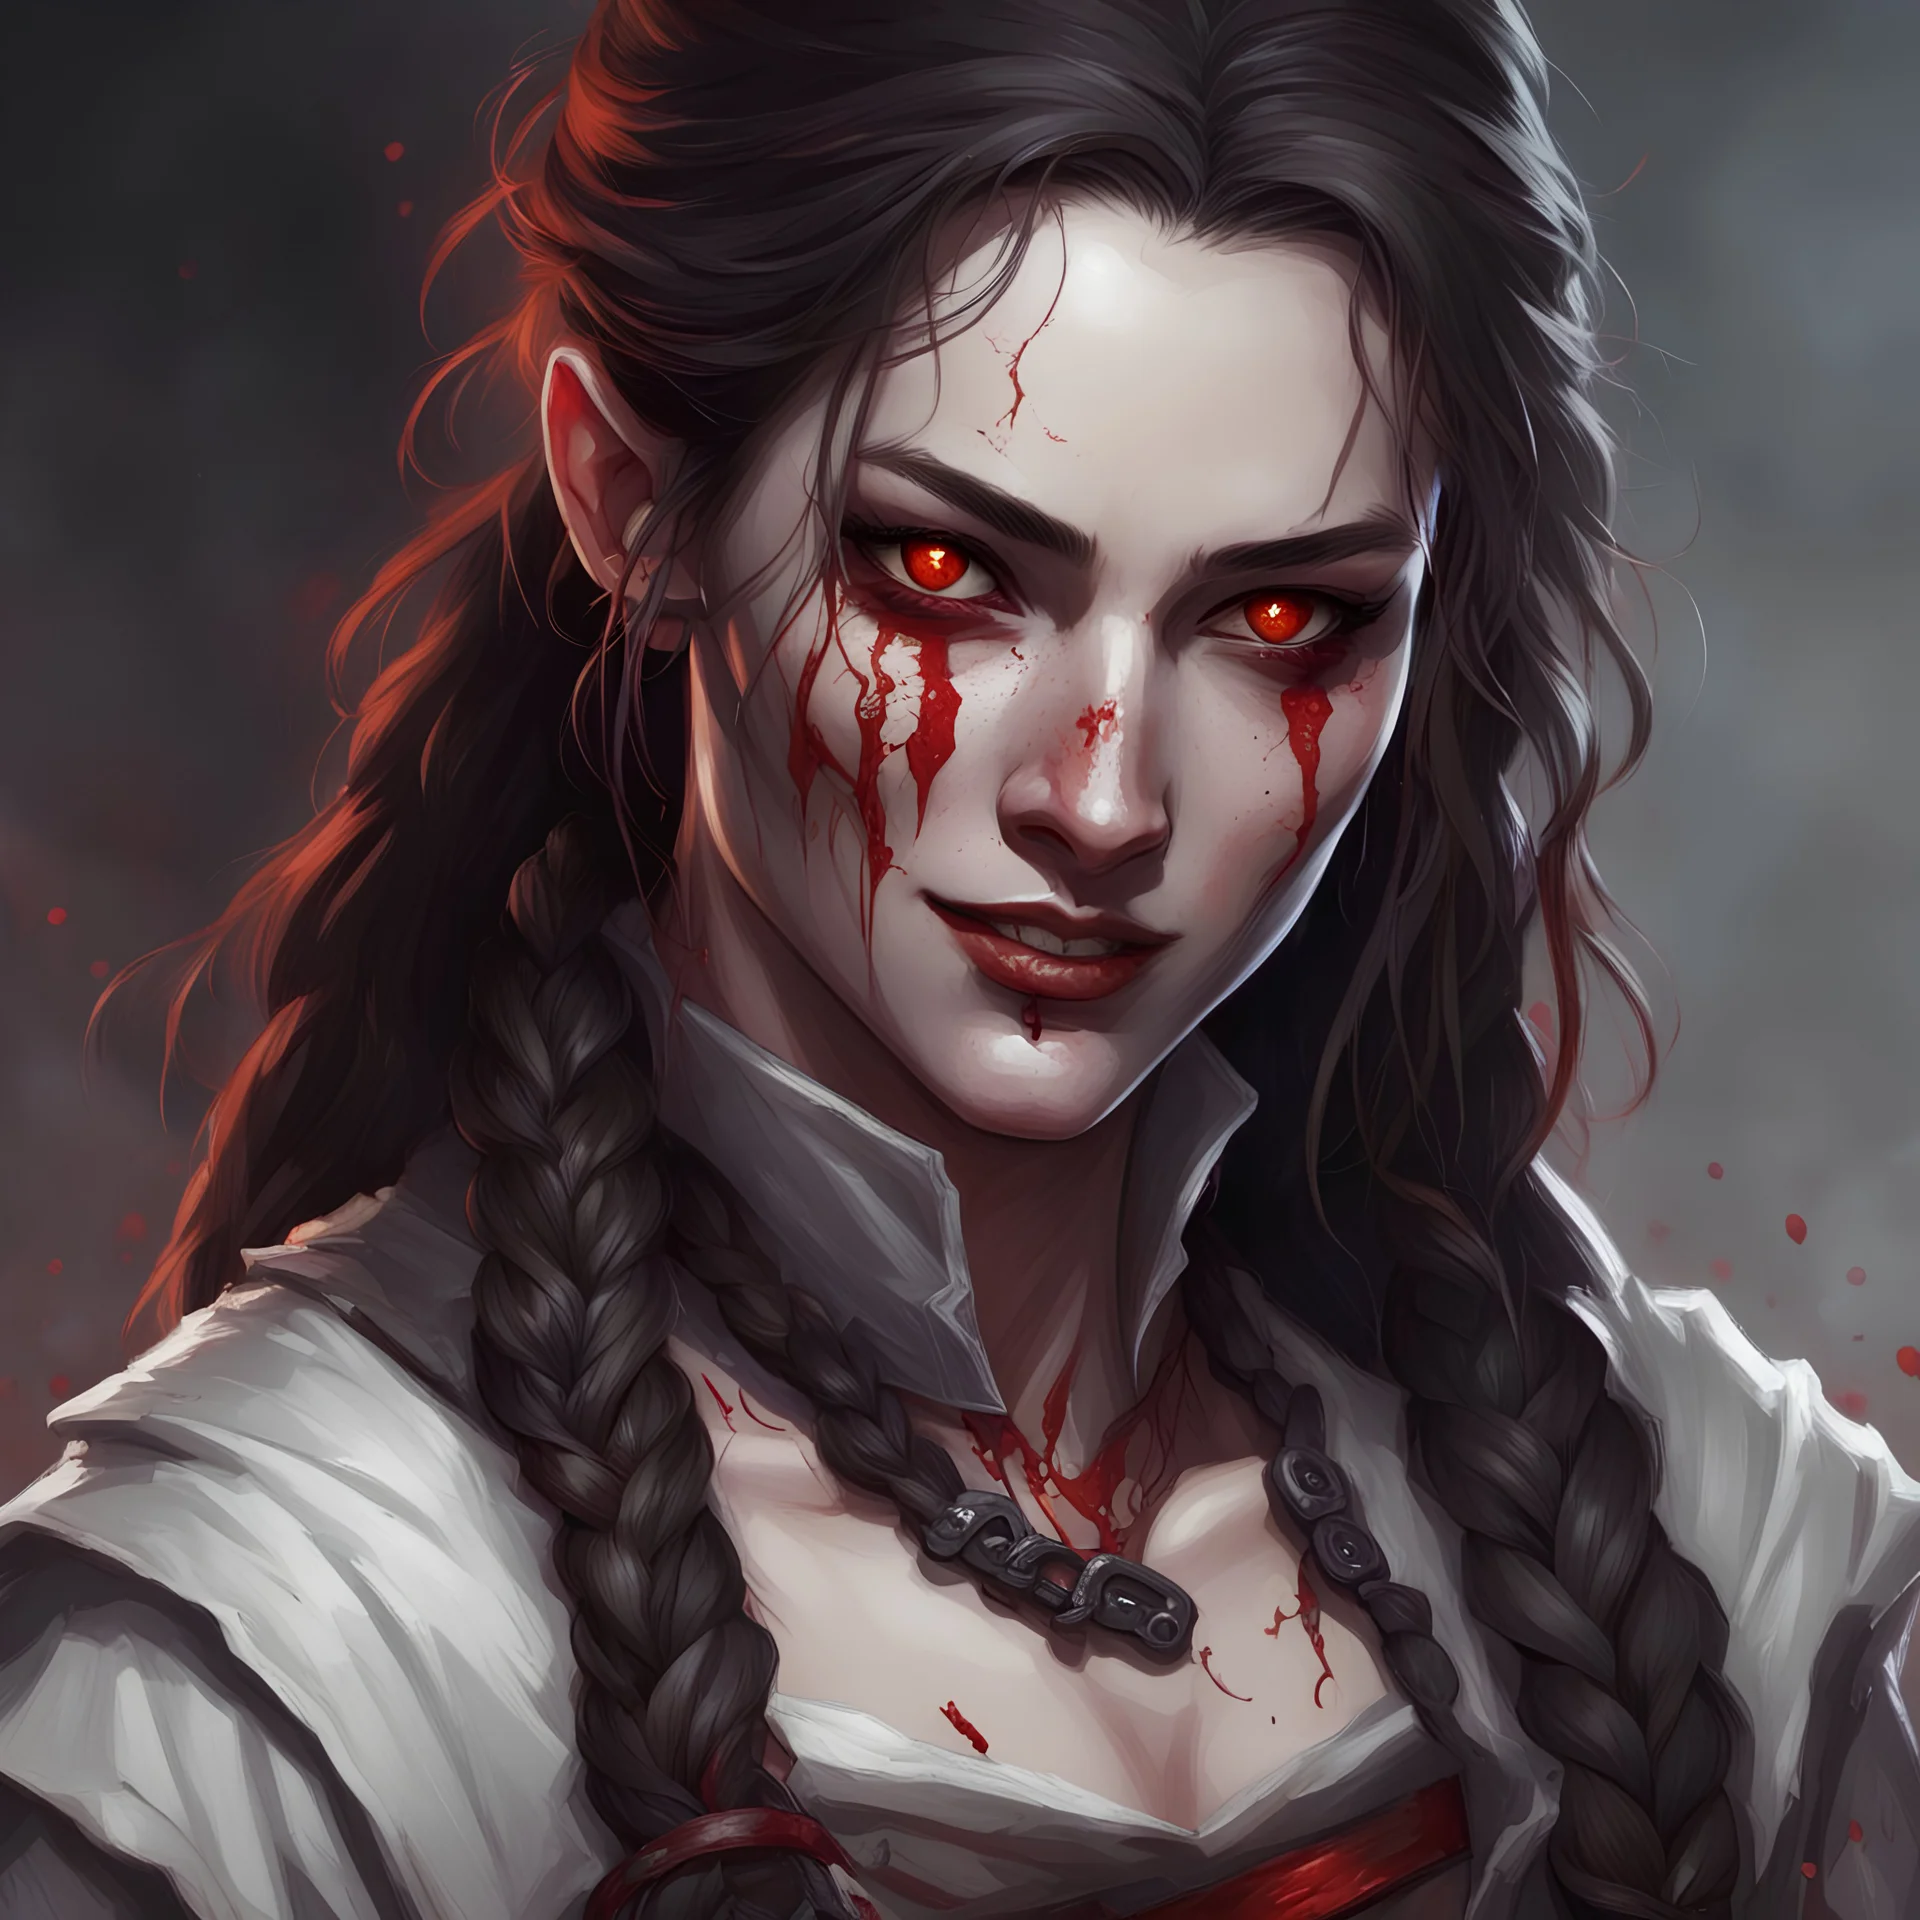 dungeons and dragons female assassin, pale skin, freckles, dark hair in long braid, bloody grin, red eyes, portrait